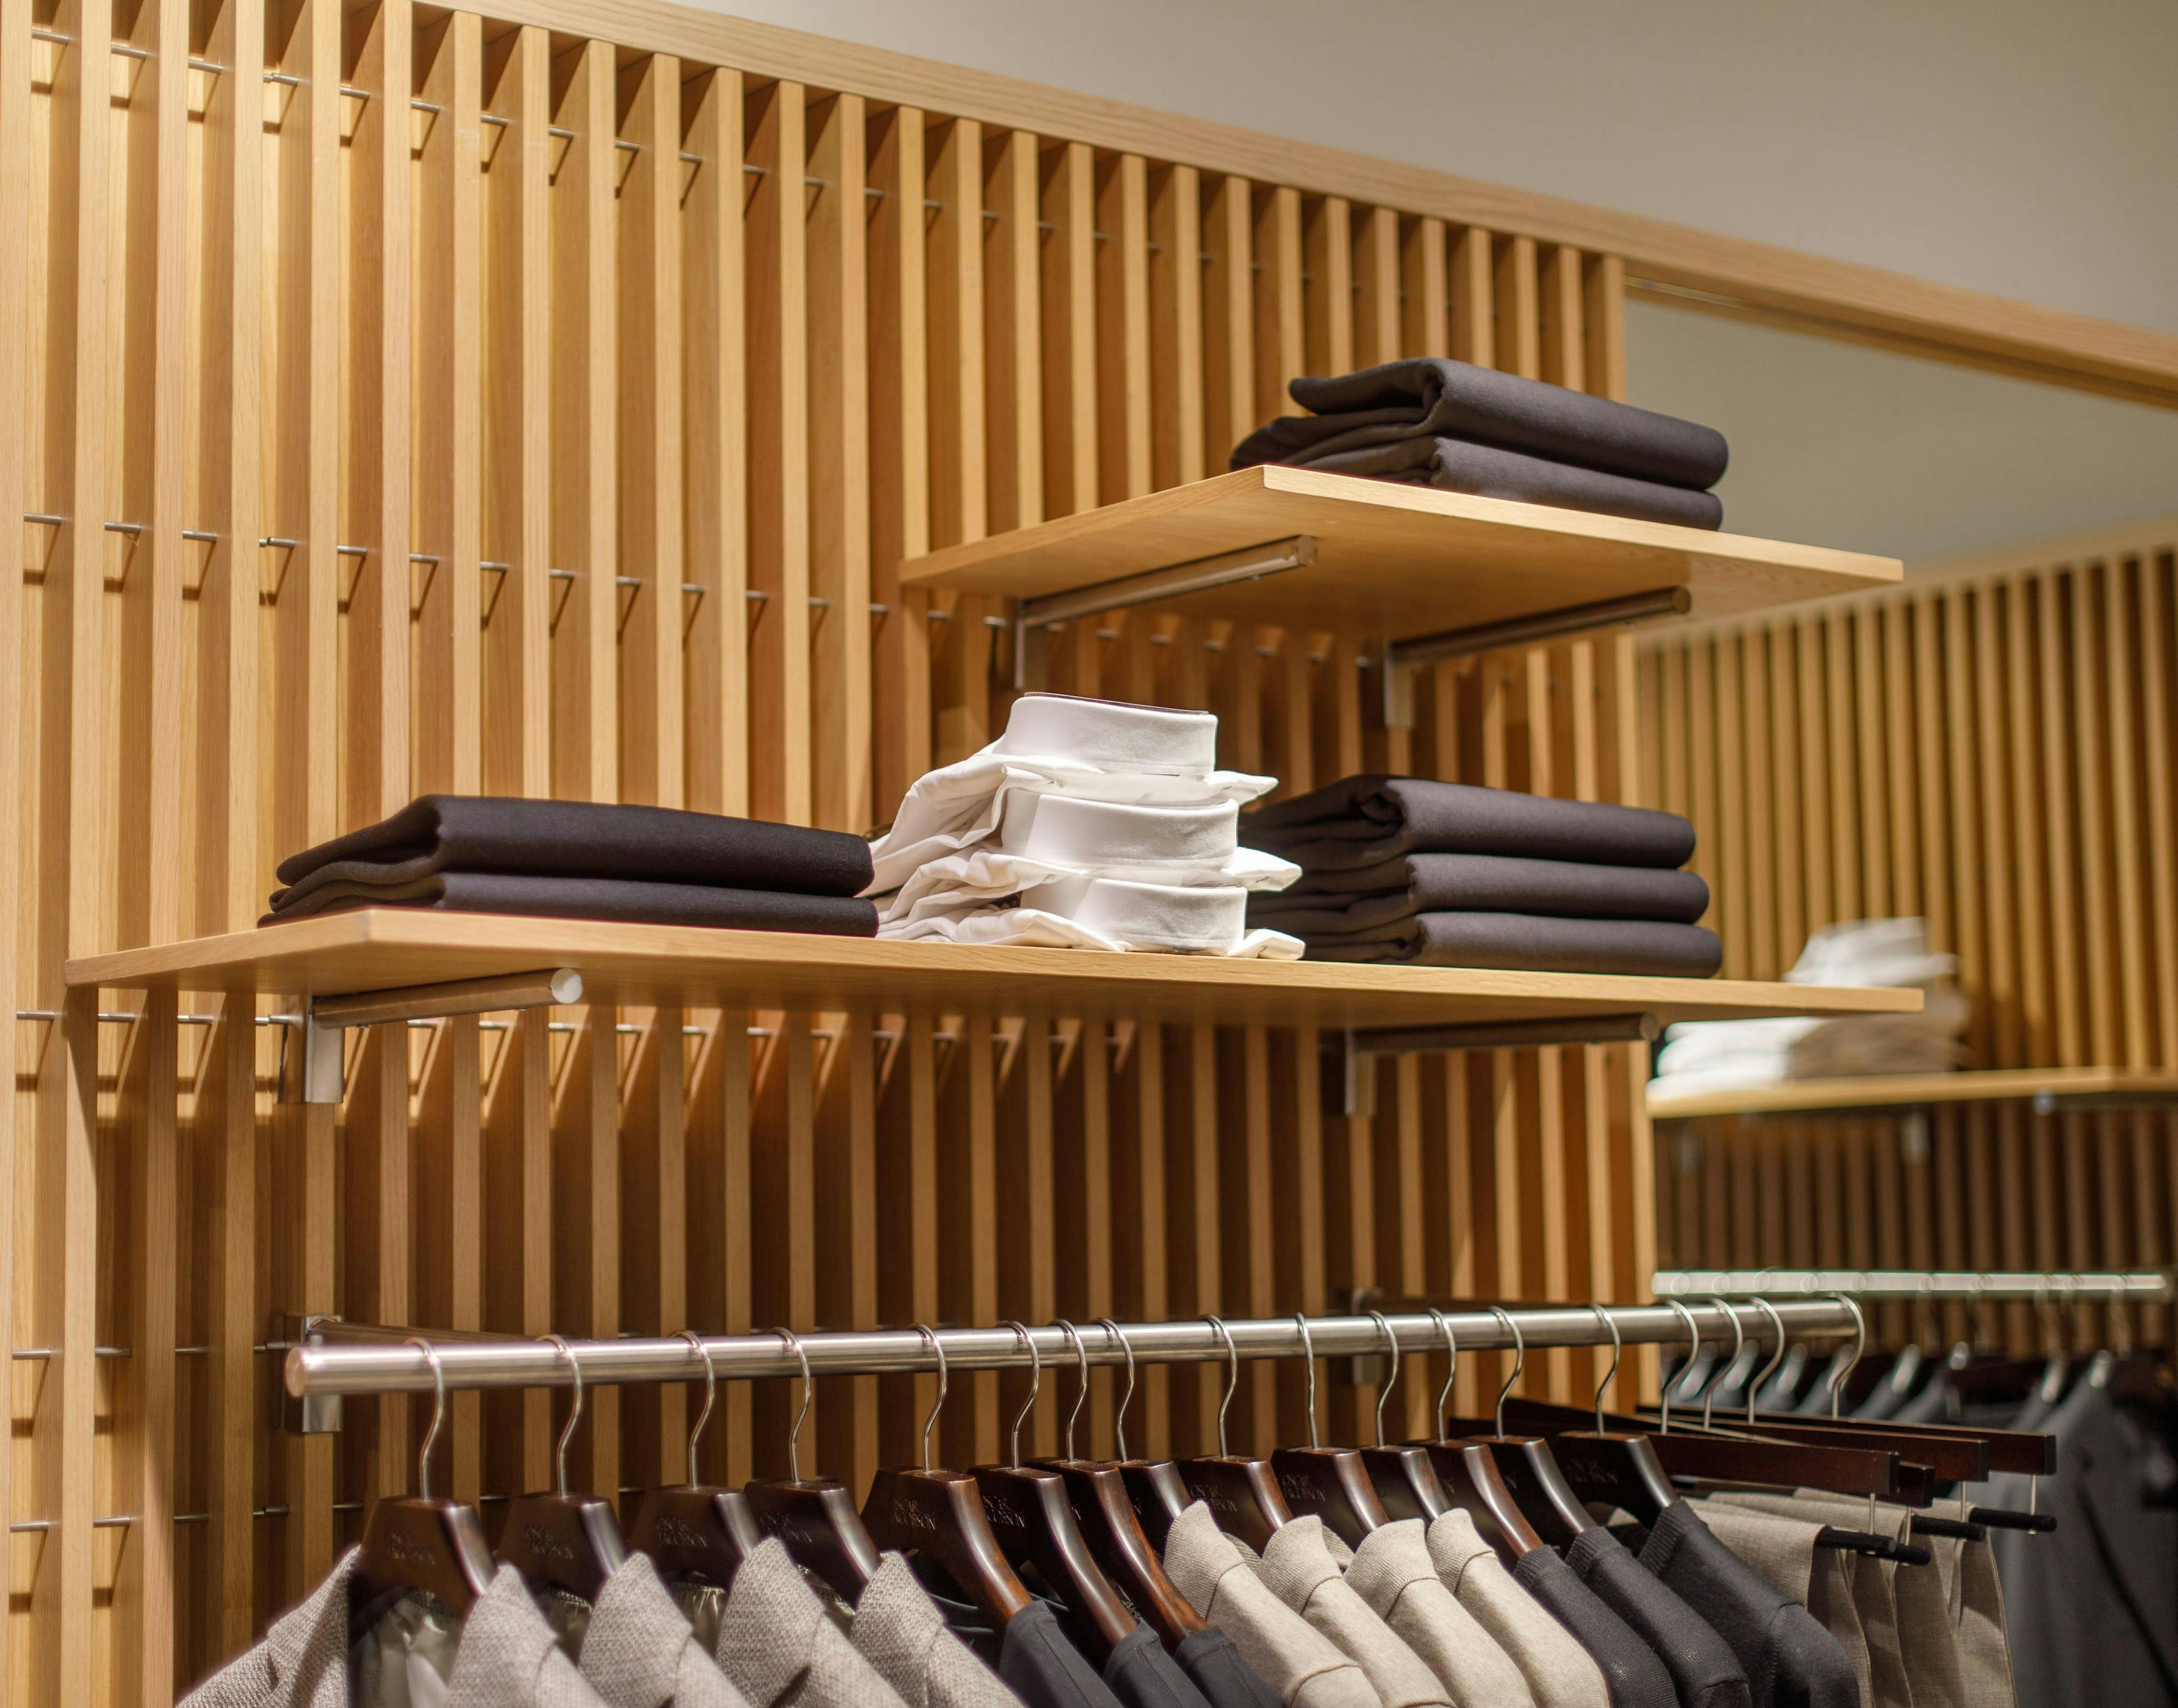 Renew your store interior: sustainable and budget-friendly options